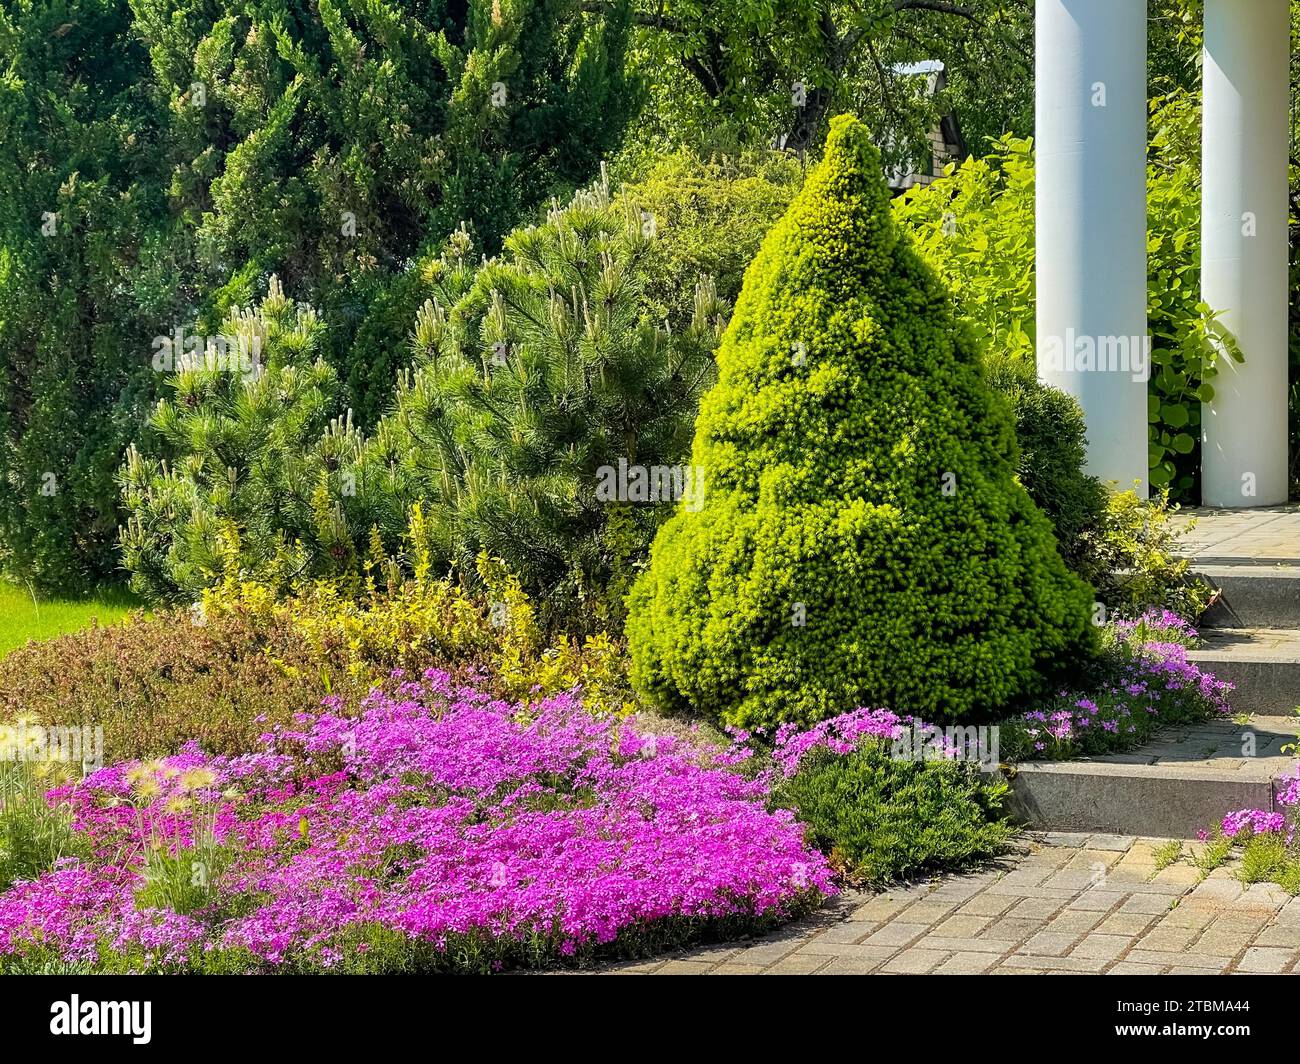 Garden landscape design with colorful flowering plants and ornamental evergreens. Gardening concept Stock Photo